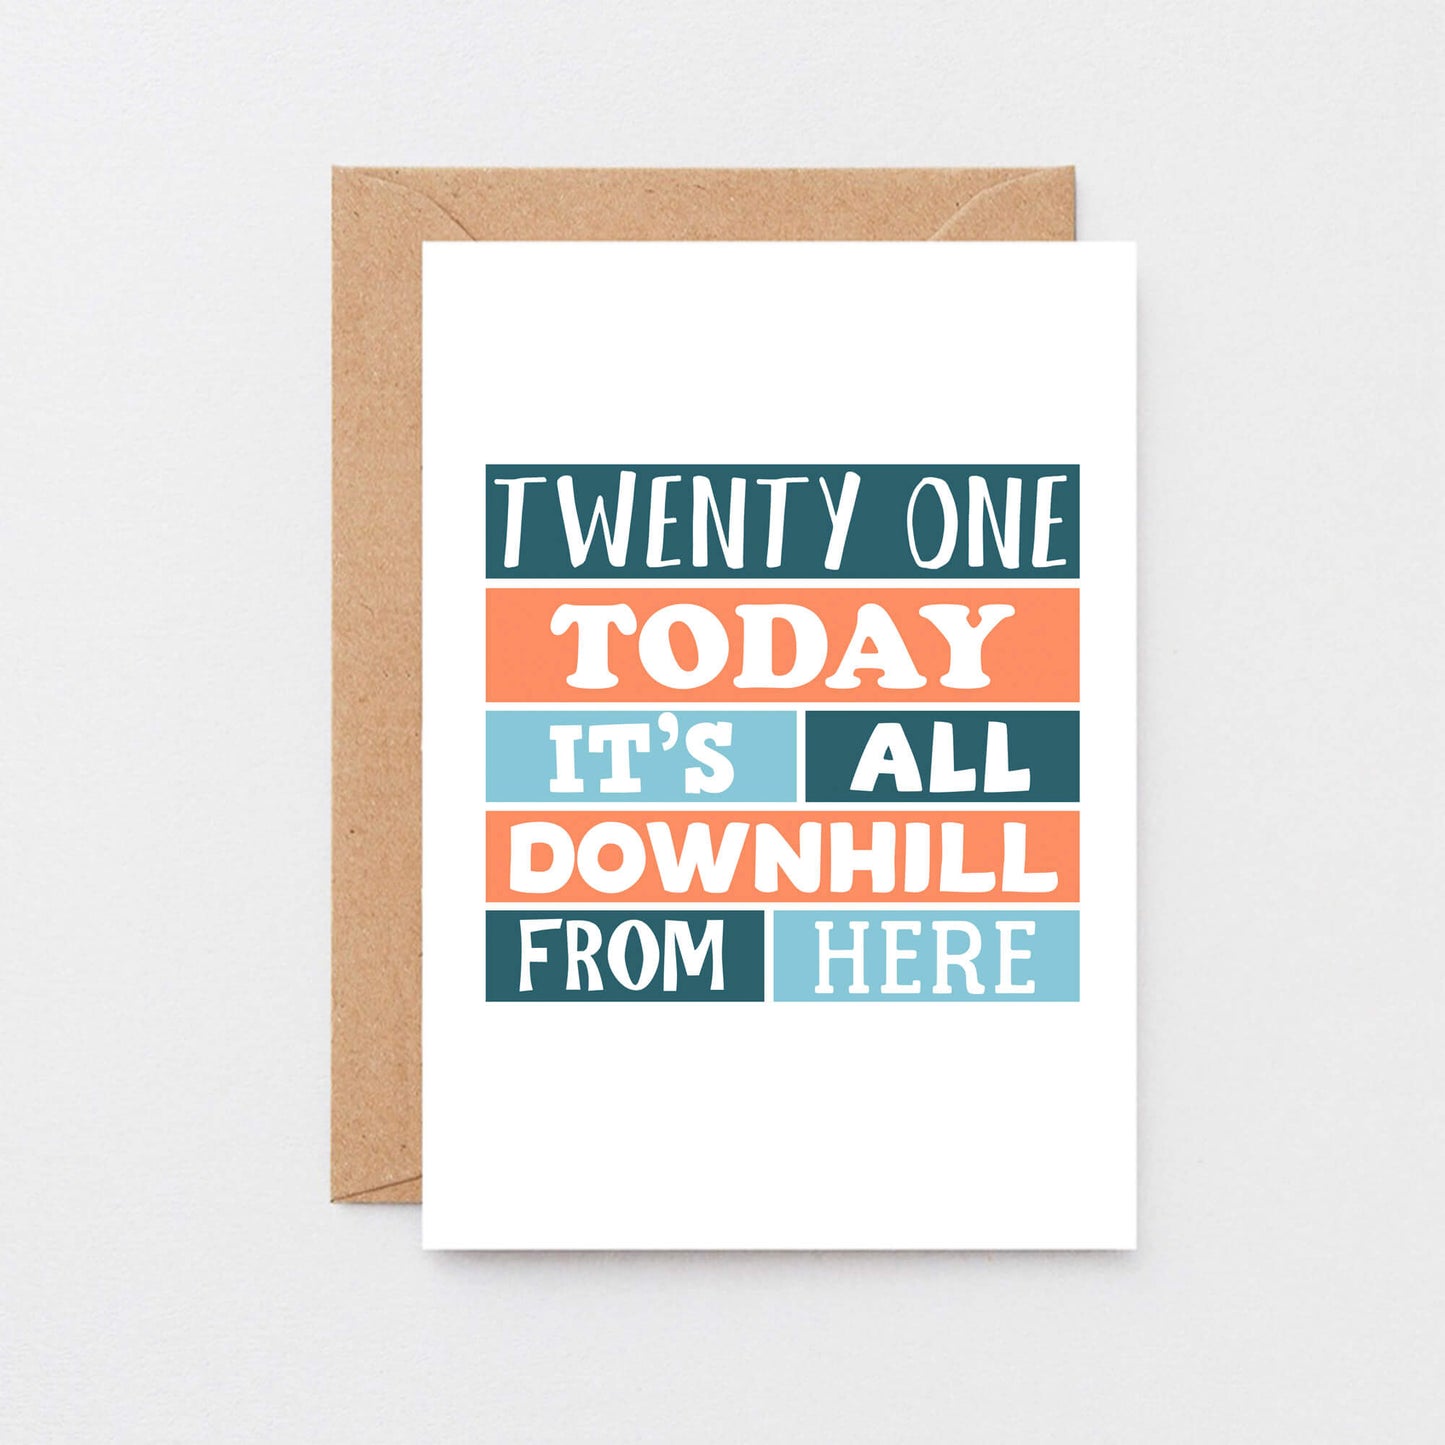 21st Birthday Card by SixElevenCreations. Reads Twenty One Today It's all downhill from here. Product Code SE0251A6